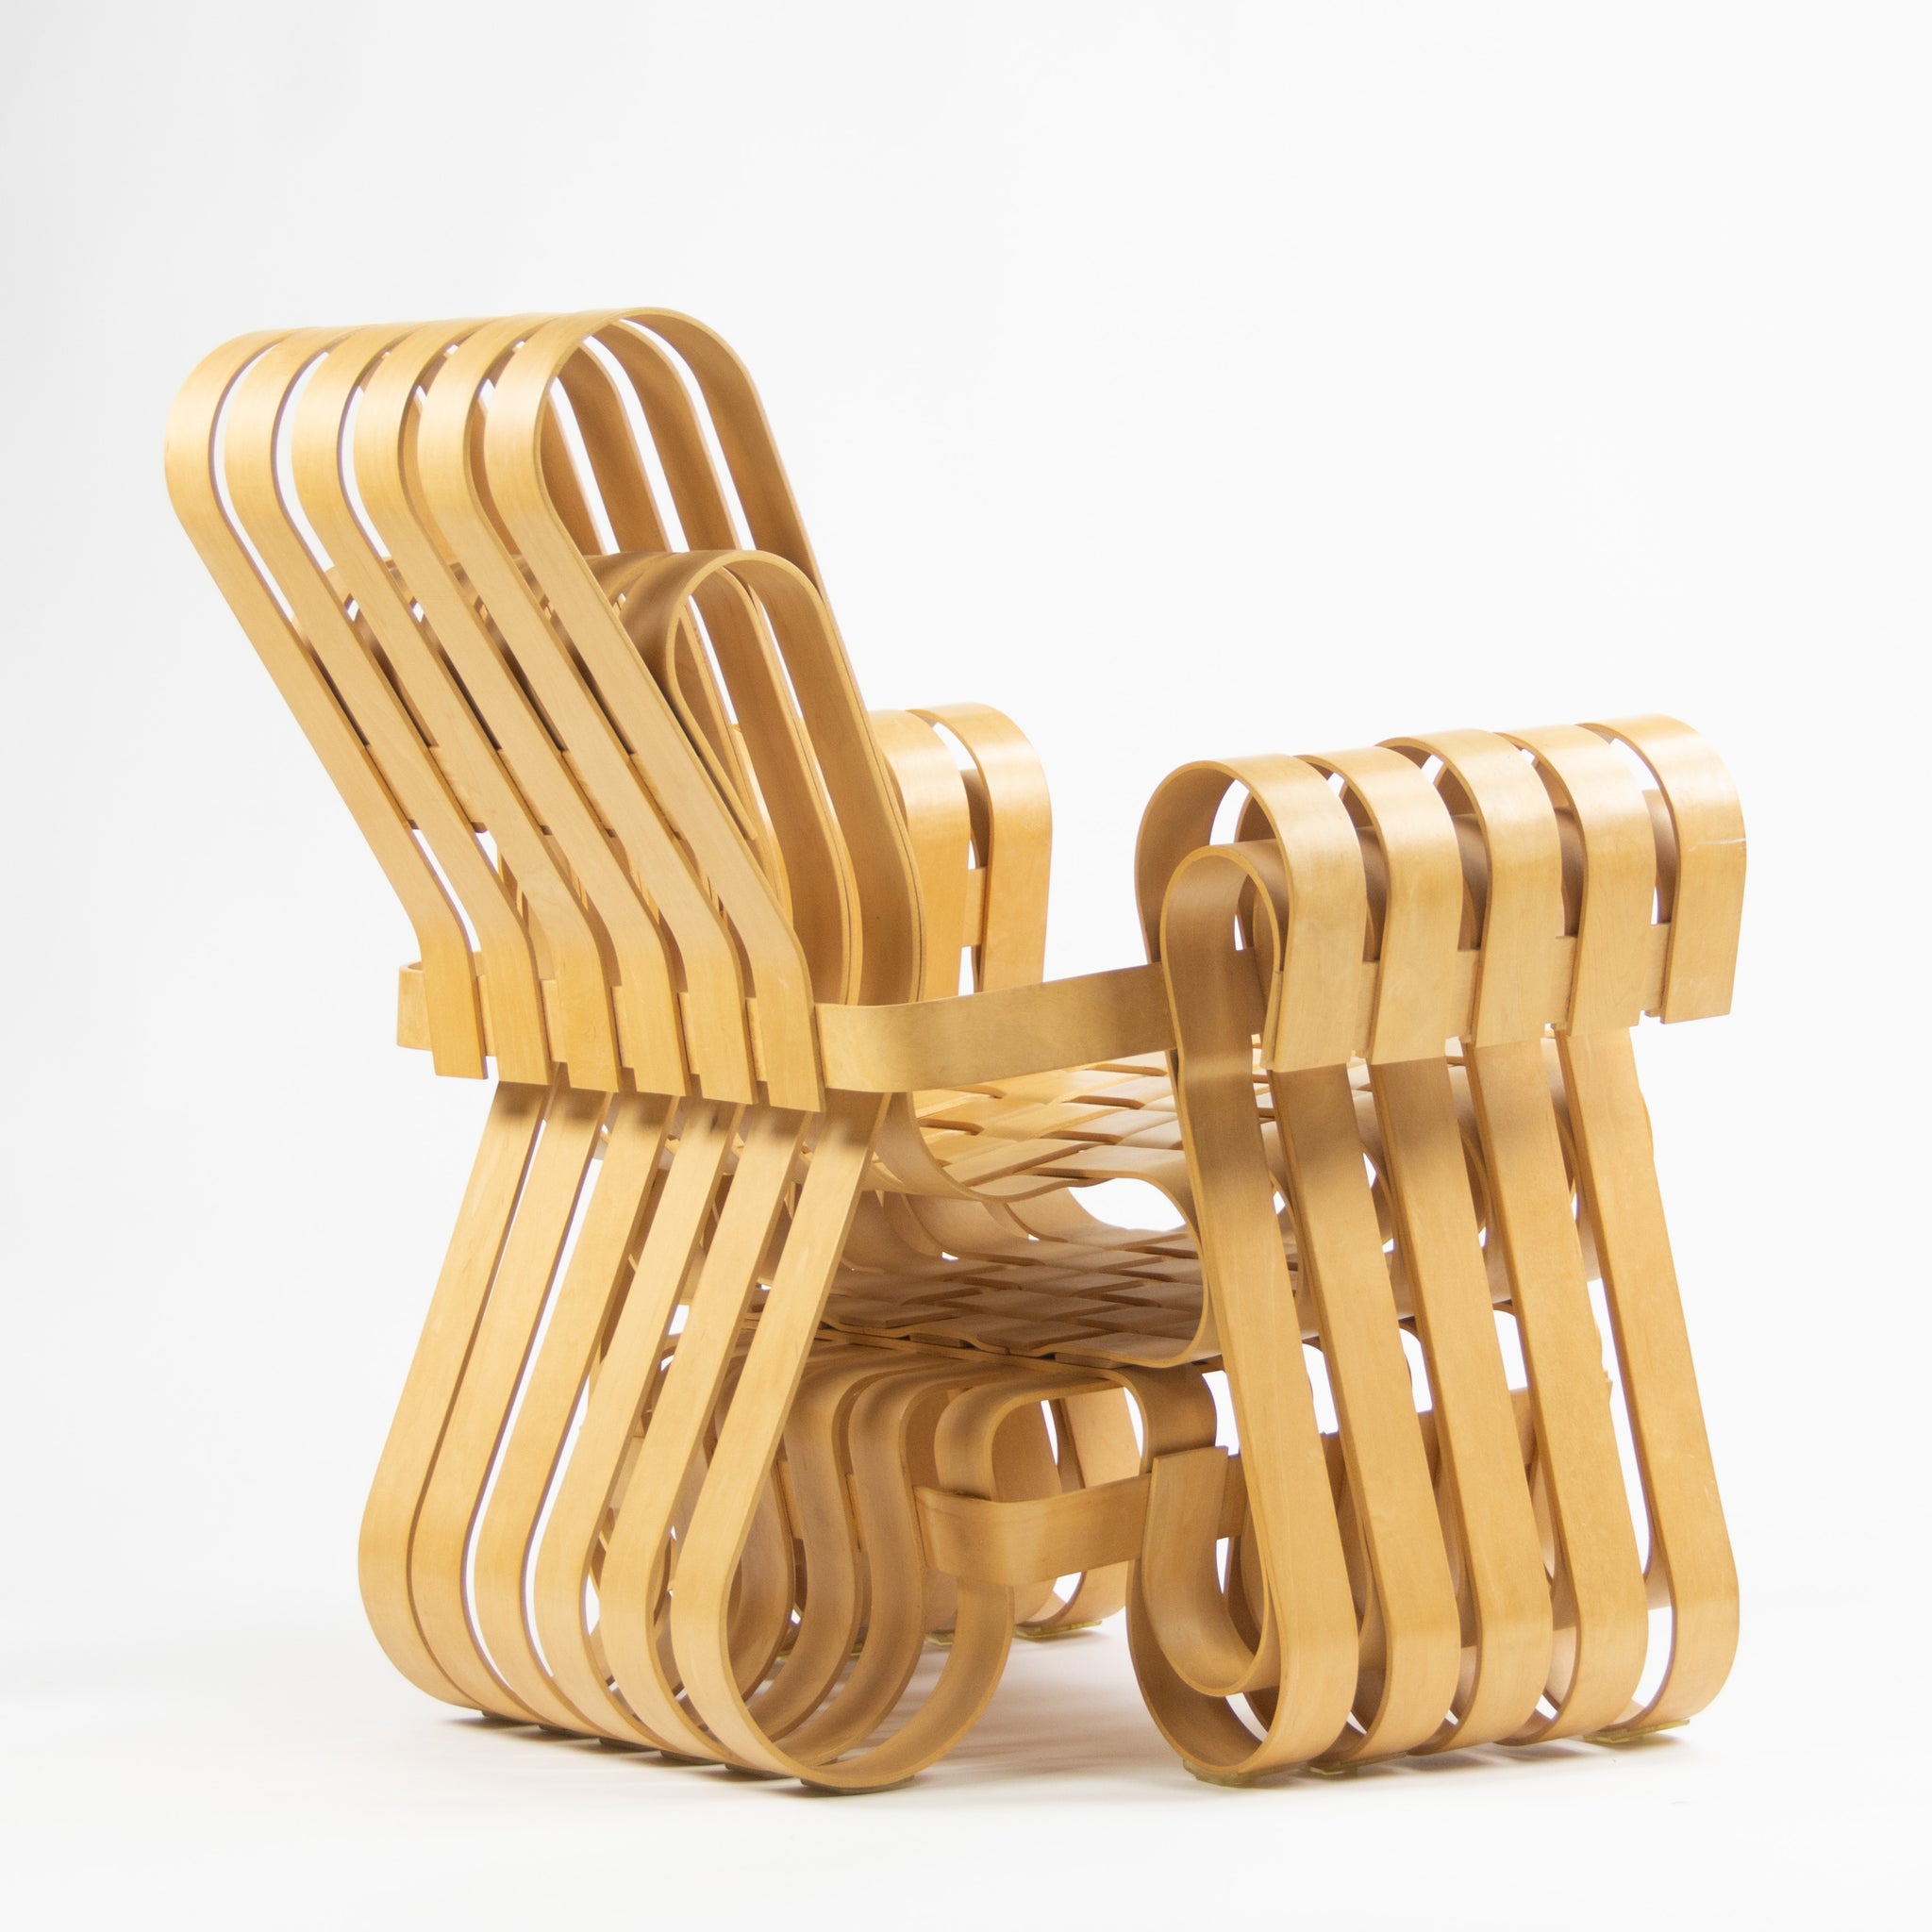 SOLD Frank Gehry for Knoll Power Play Lounge Chair and Ottoman Maple 1993